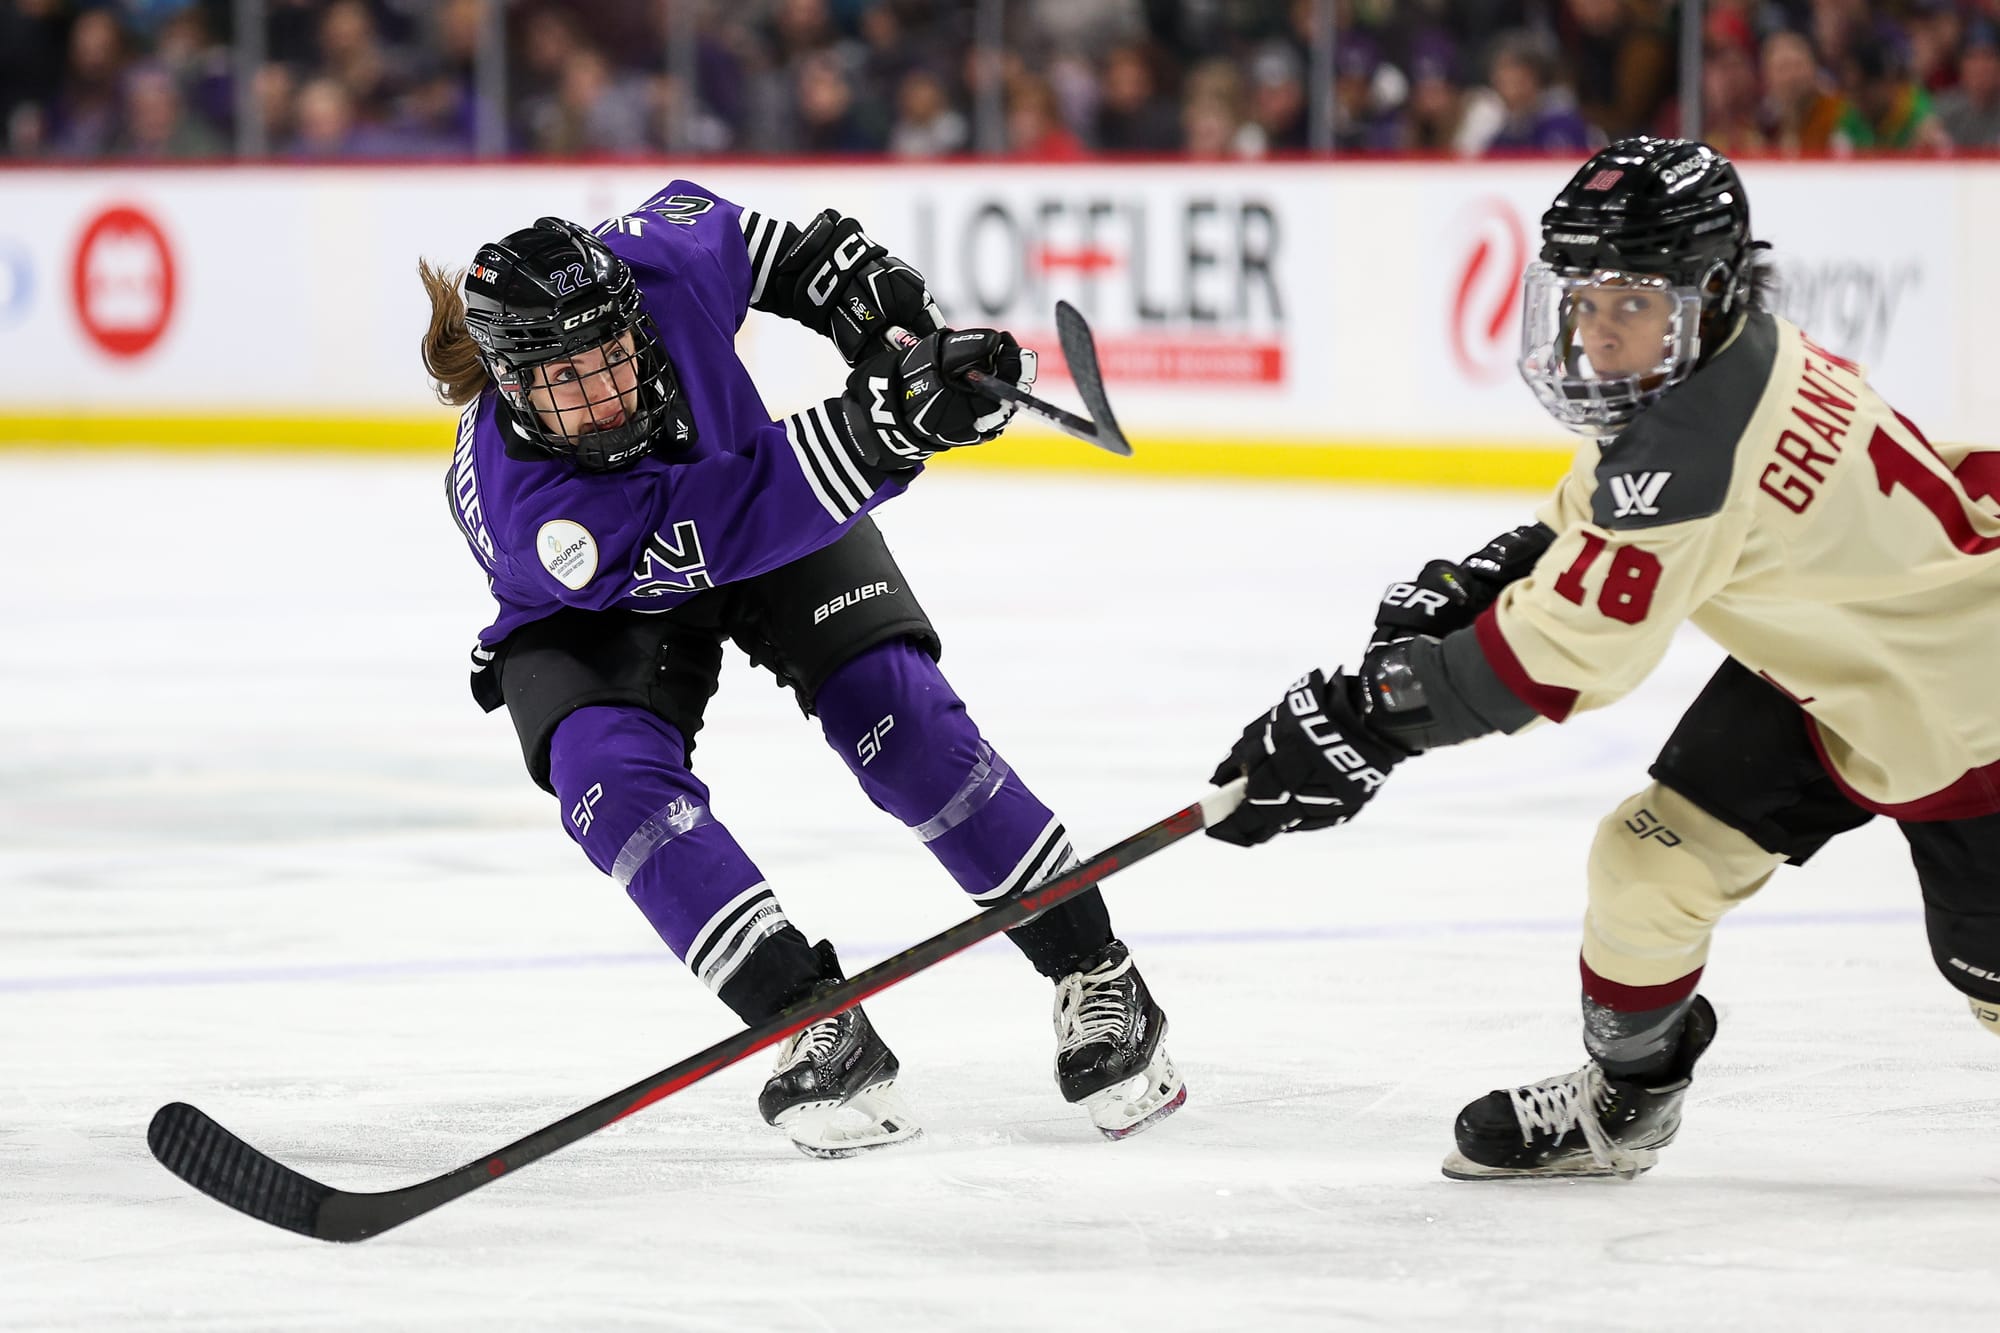 Natalie Buchbinder takes a shot against Montréal as Mikyla Grant-Mentis defends. Buchbinder is hunched over with her stick raised in a follow-through. Grant-Mentis is hunched over with her stick on the ice outstretched to try to defend. Buchbinder is in purple, Grant-Mentis is cream.